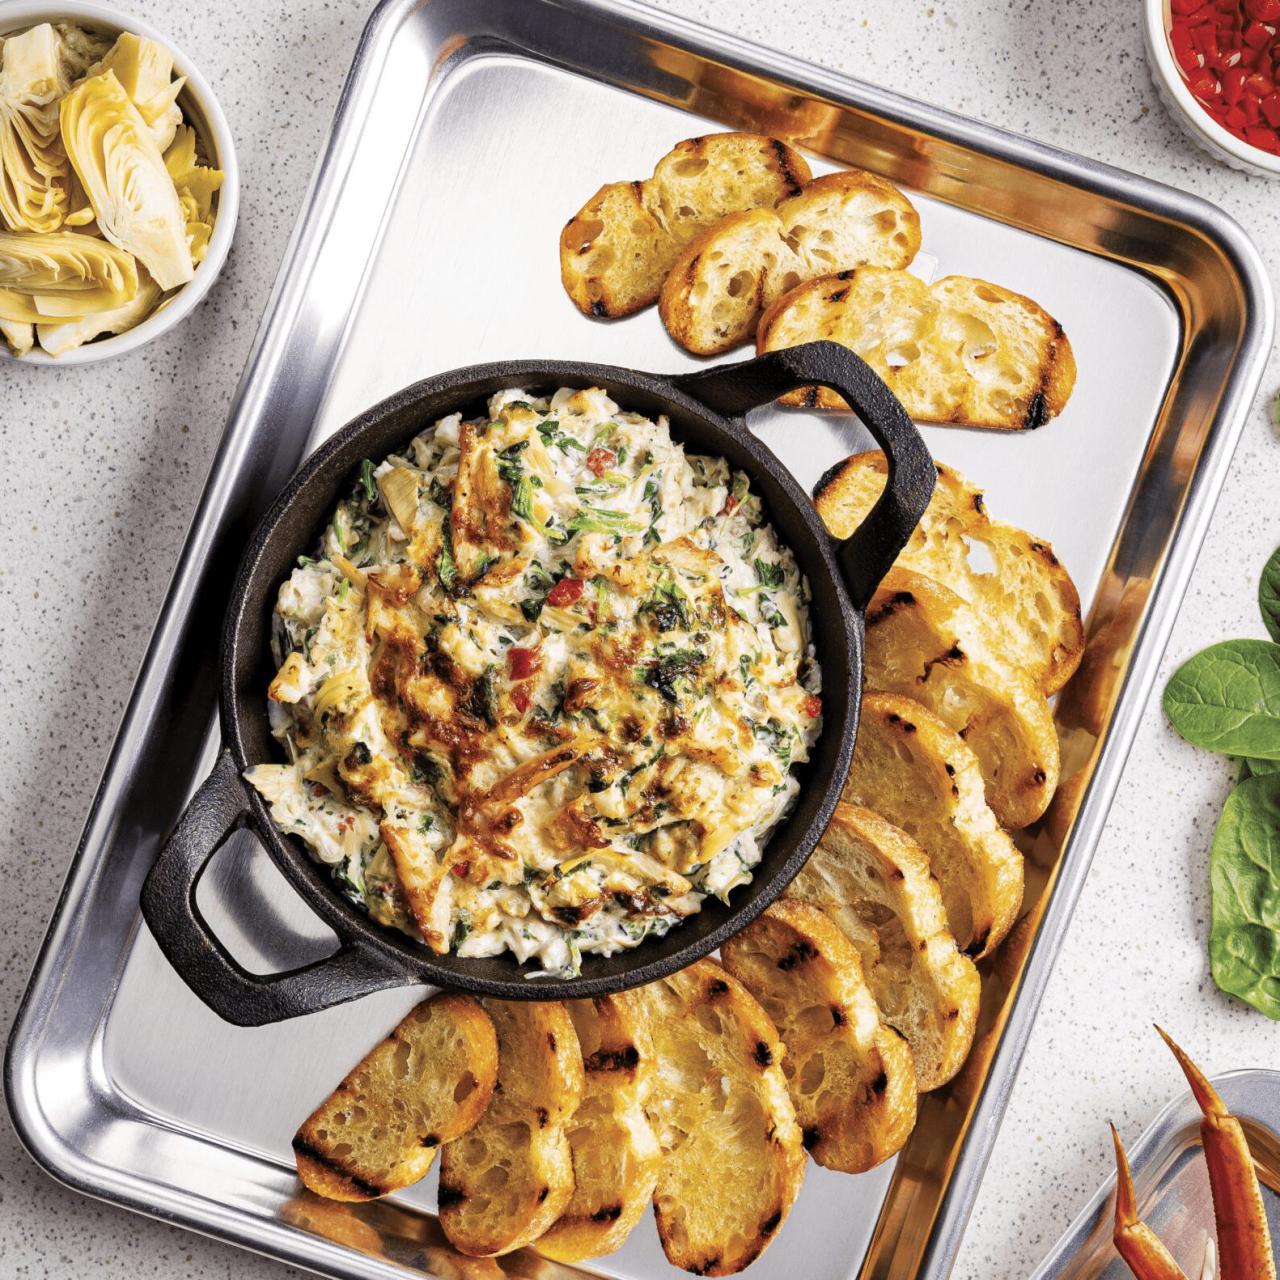 Hot Crab, Spinach and Artichoke Dip | Sysco Foodie